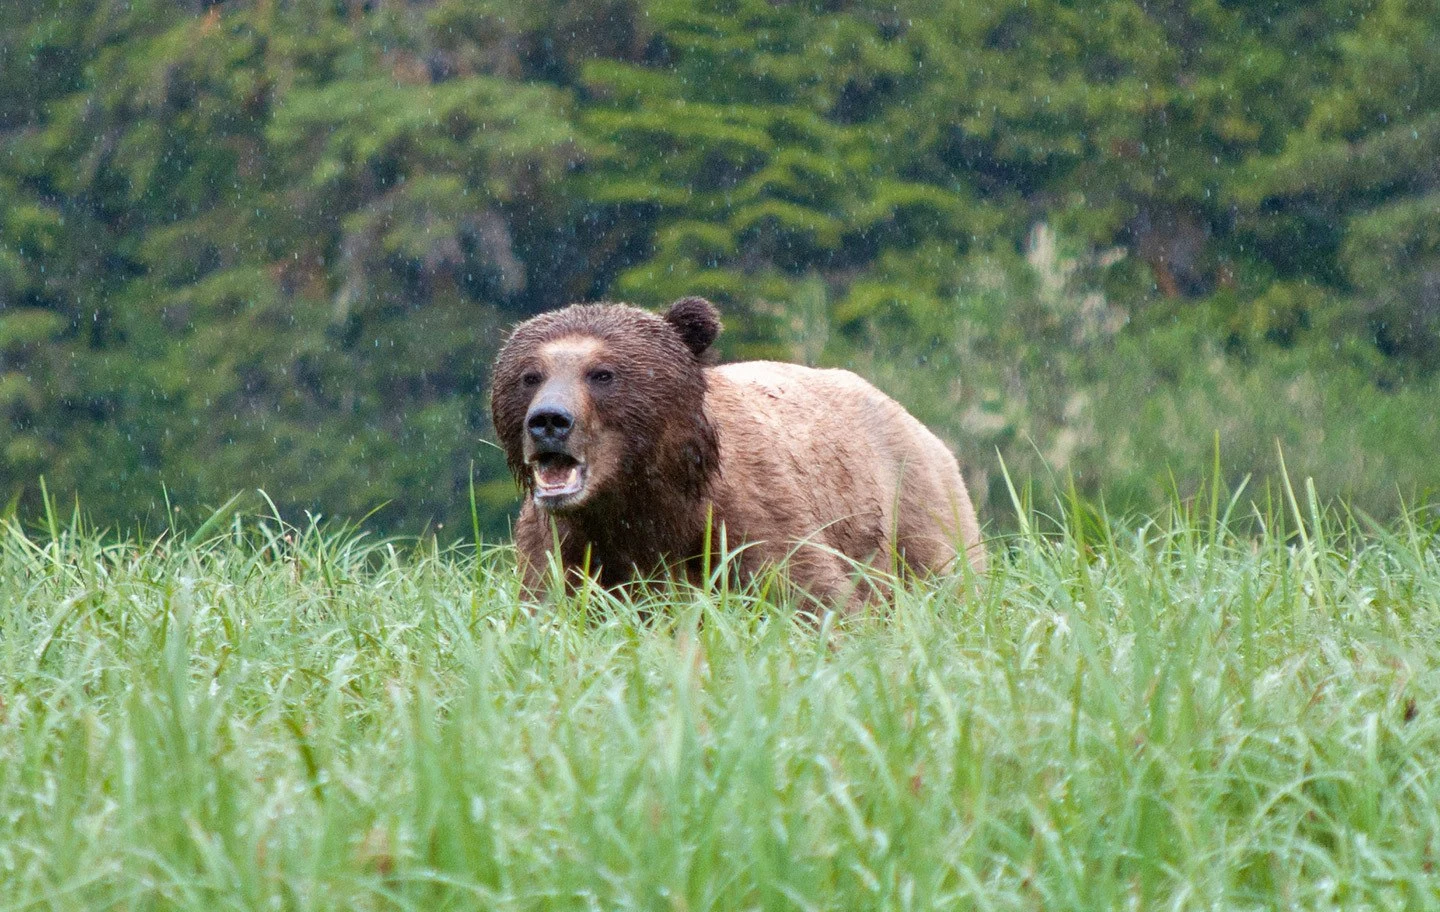 Grizzly bear in the Great Bear Rainforest, Canada